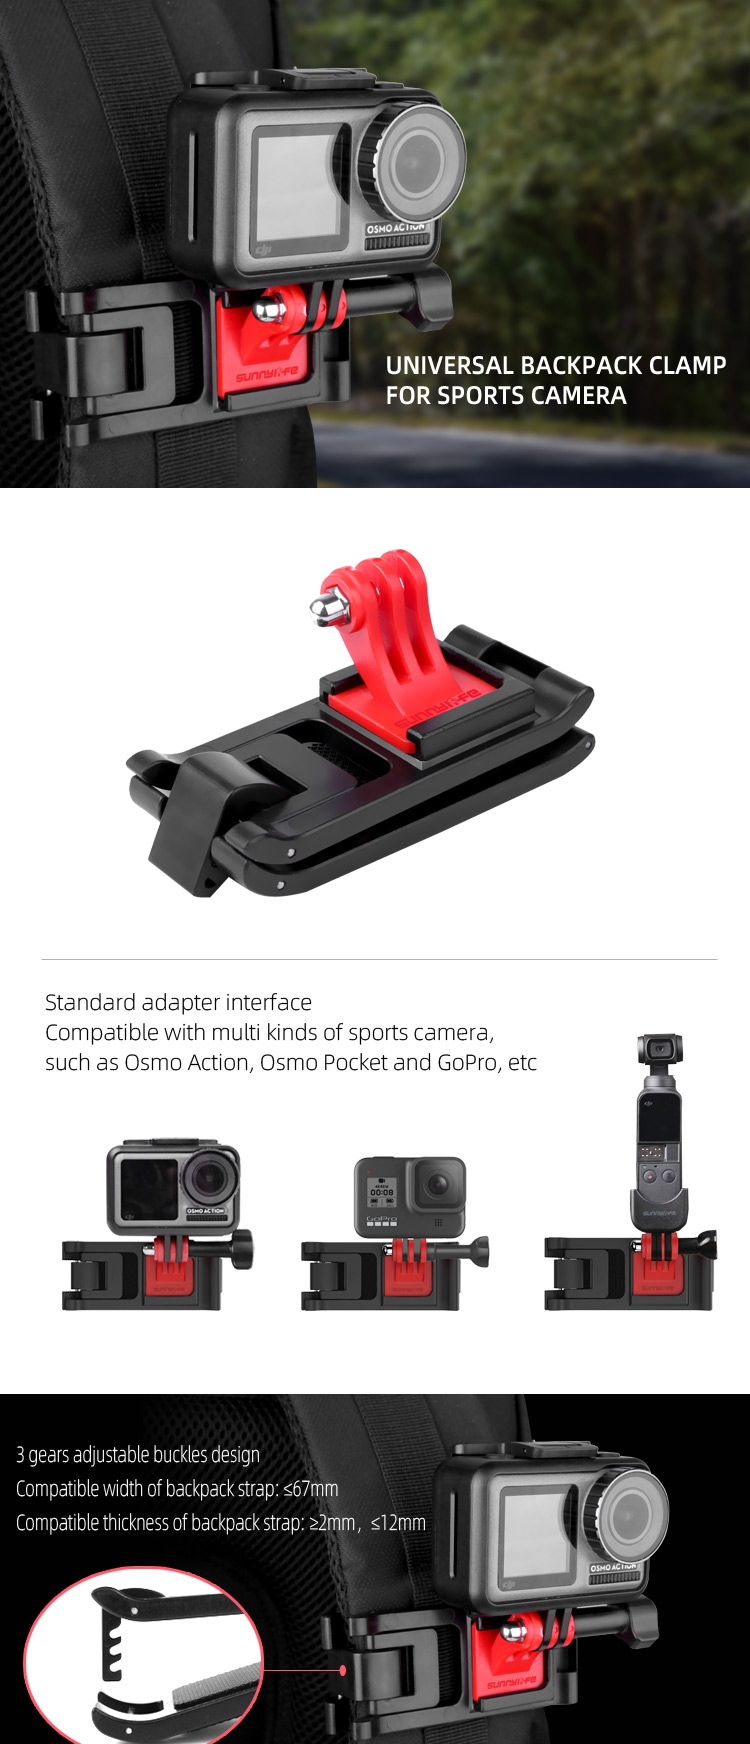 Sunnylife Universal Sports Camera Backpack Clamp Adjustable Clips for GoPro 8 / DJI Osmo Action / Osmo Pocket - Photo: 1